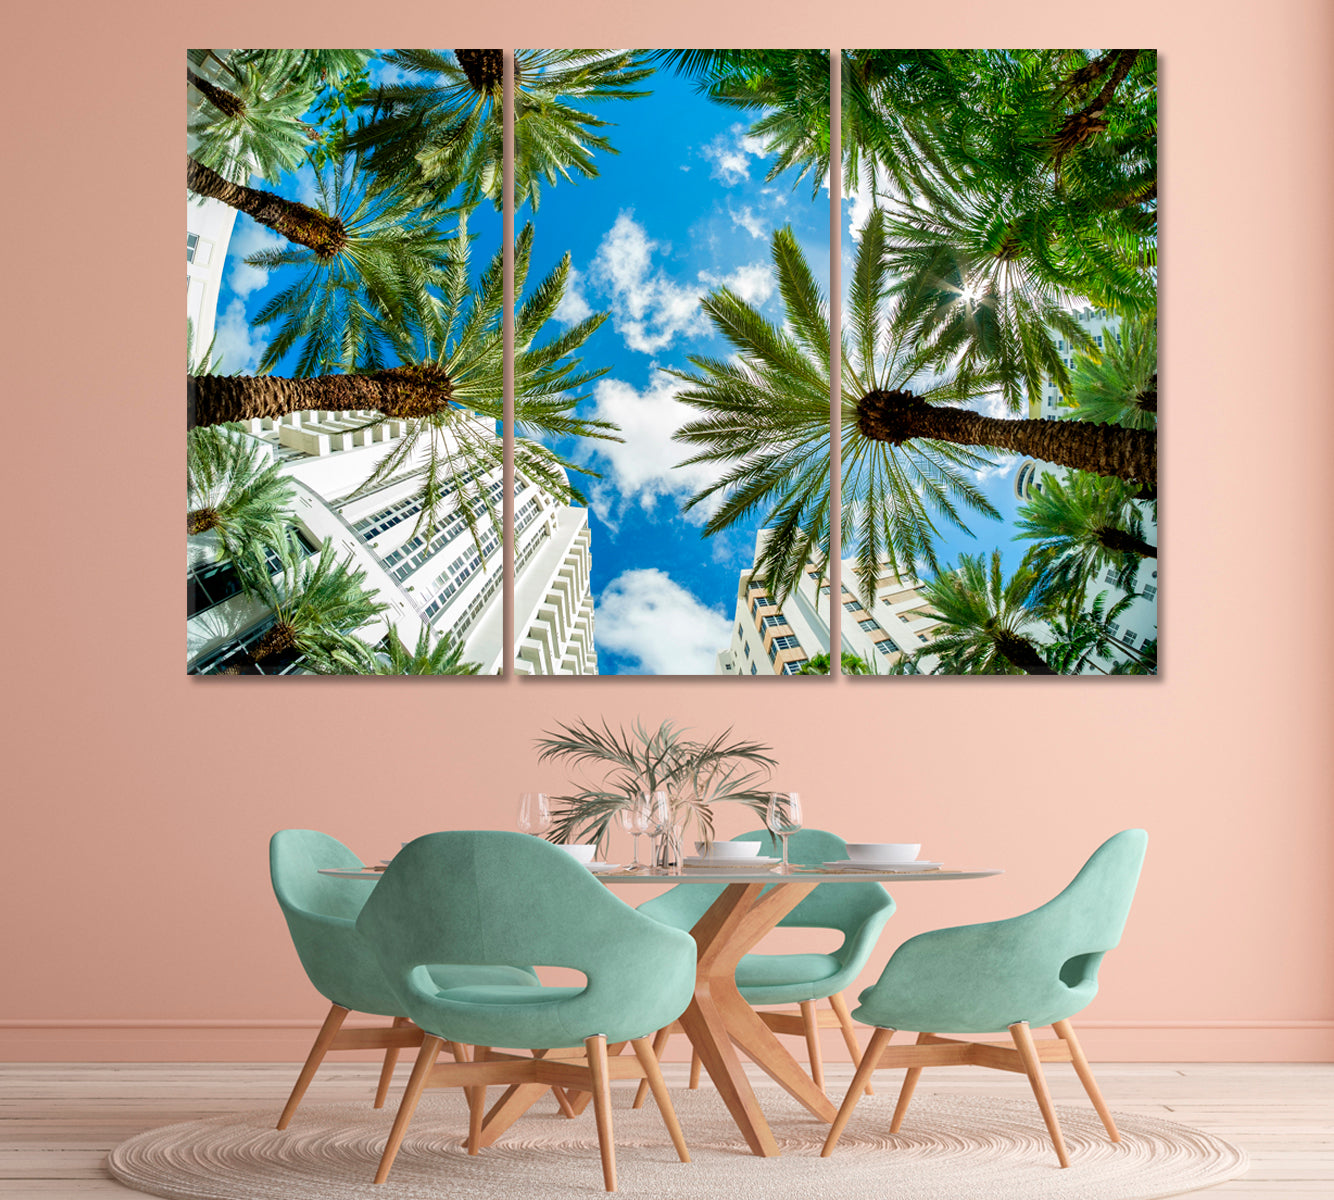 Miami Cityscape View with Palm Trees Canvas Print-Canvas Print-CetArt-1 Panel-24x16 inches-CetArt